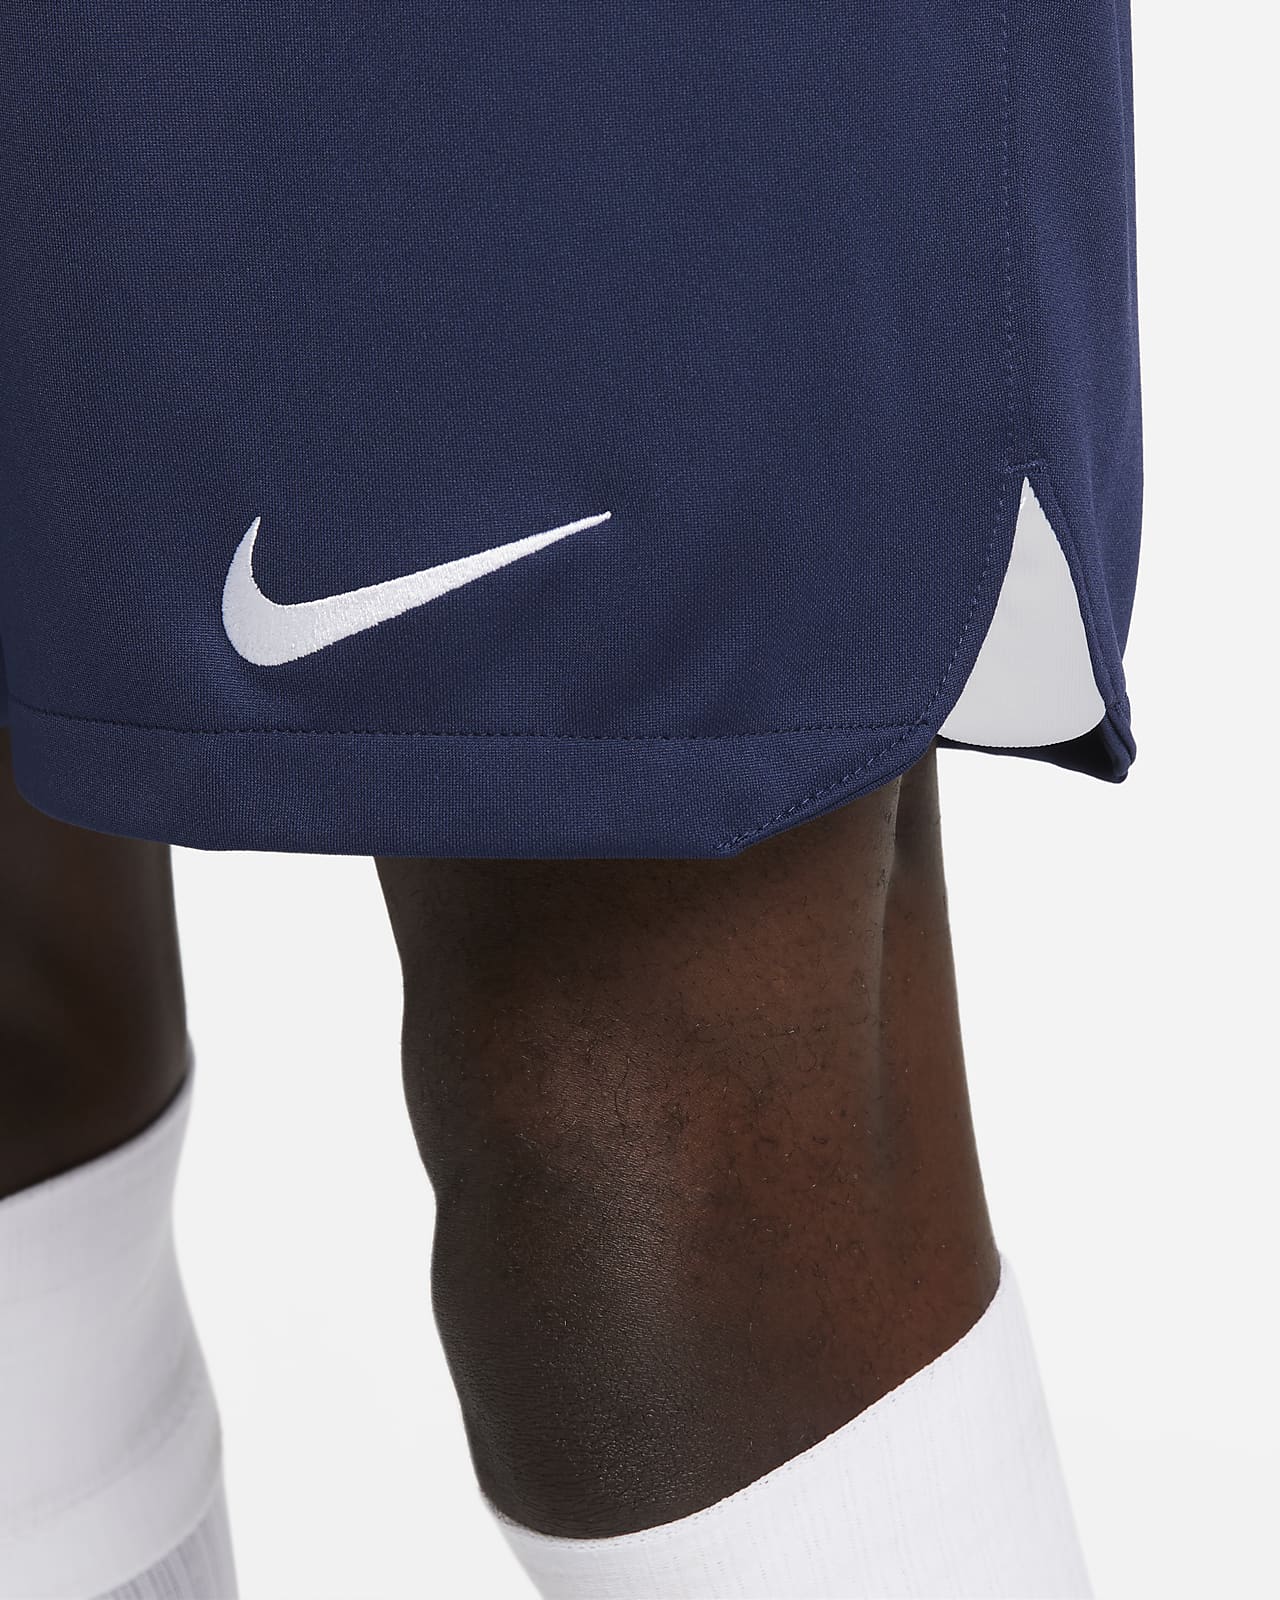 Buy football shorts psg shorts Online With Best Price, Oct 2023